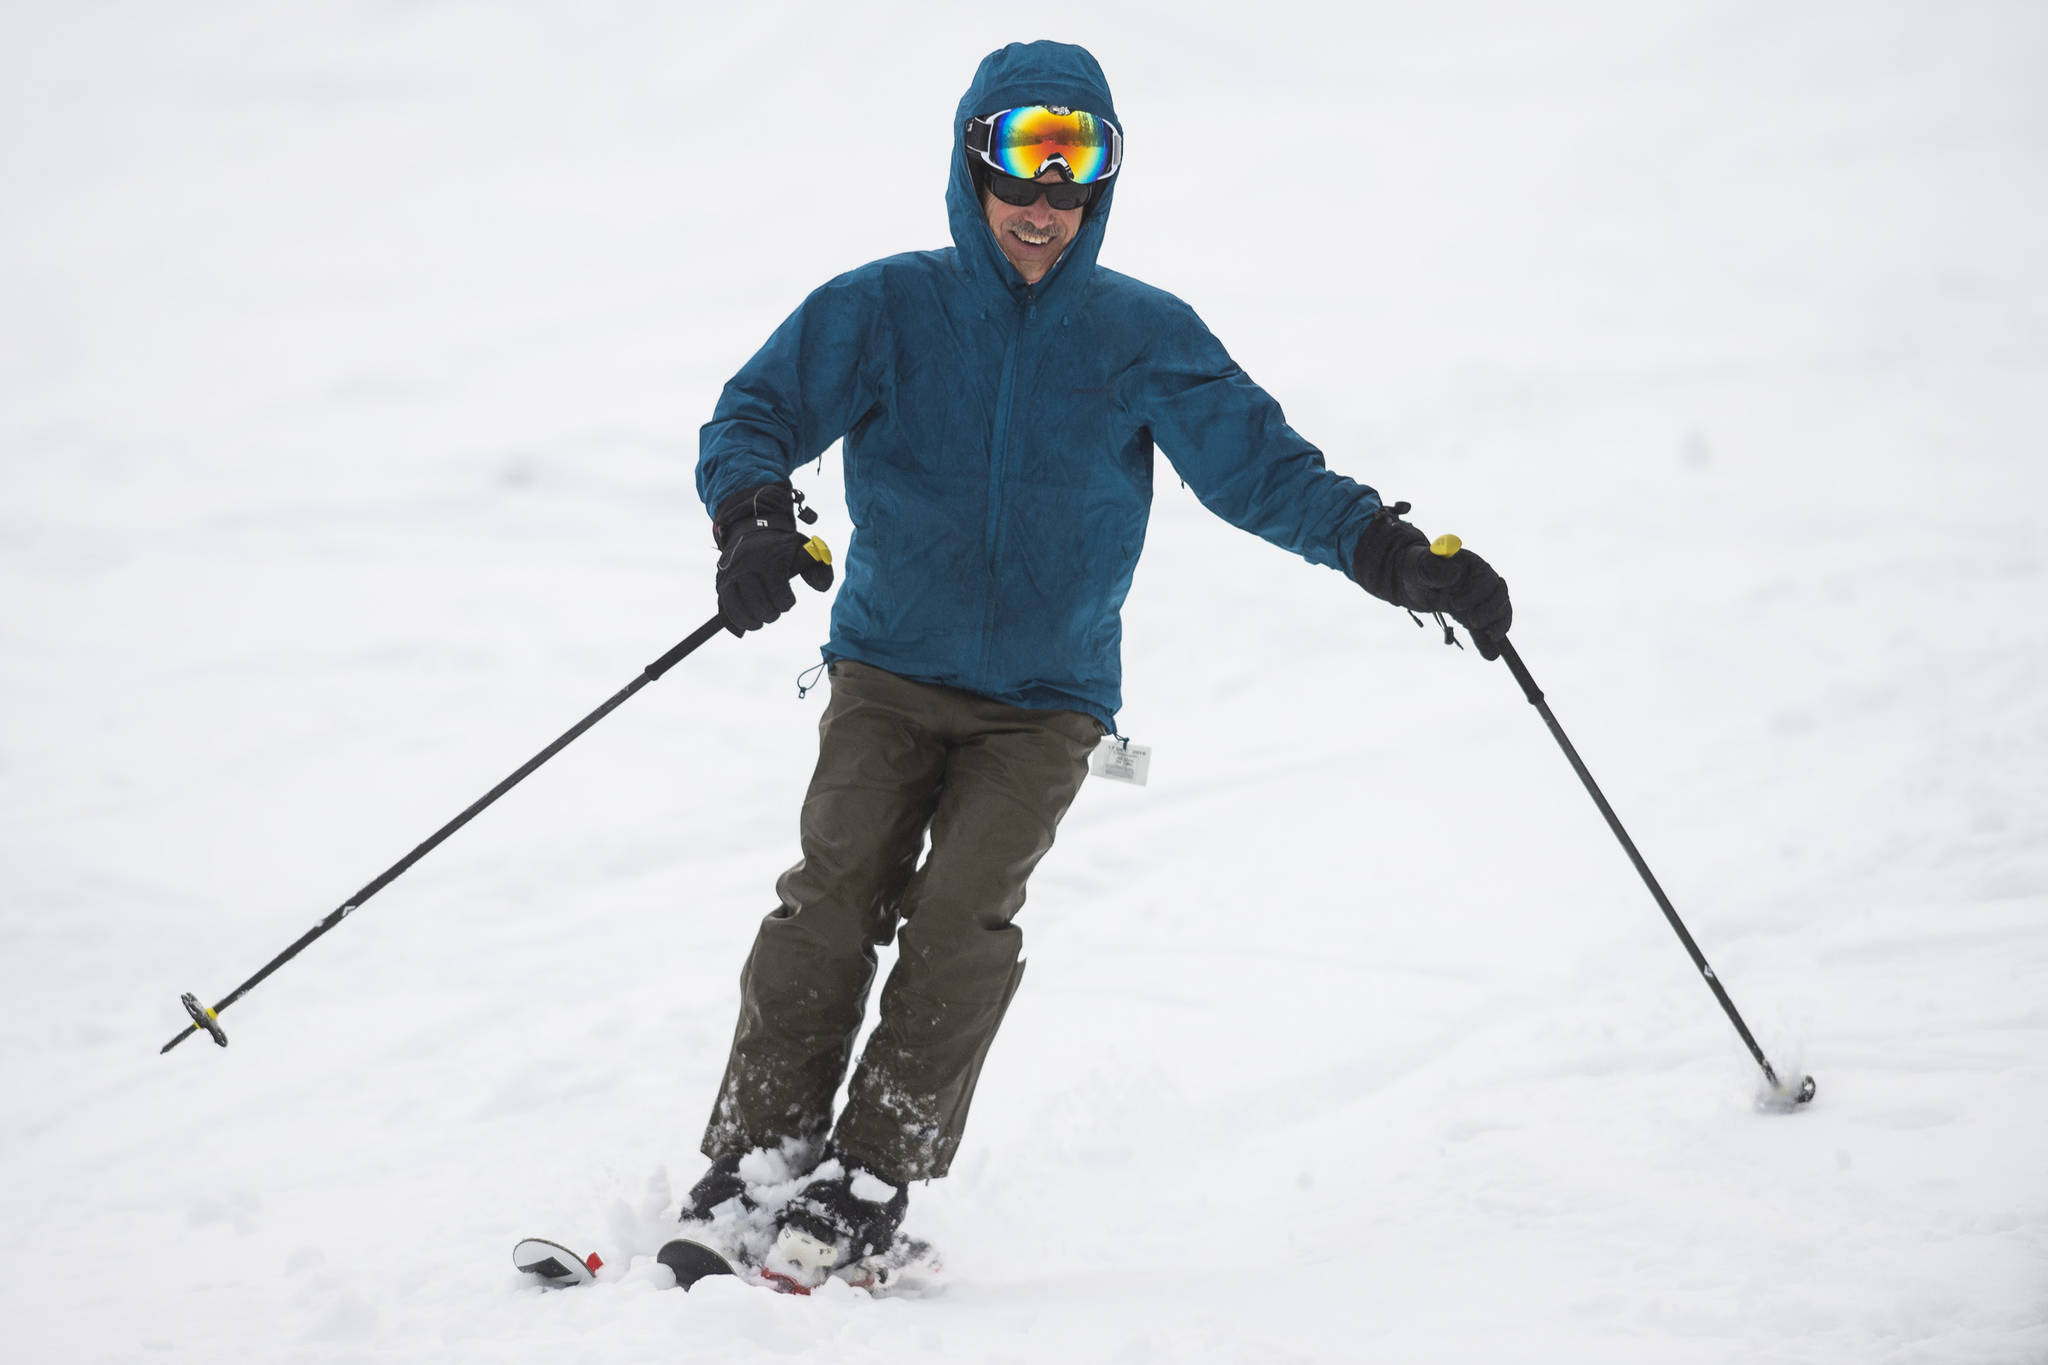 Jeff Sloss takes a first run after the Hooter Chairlift opened for the first time this season at Eaglecrest on Monday, Dec. 17, 2018. (Michael Penn | Juneau Empire)